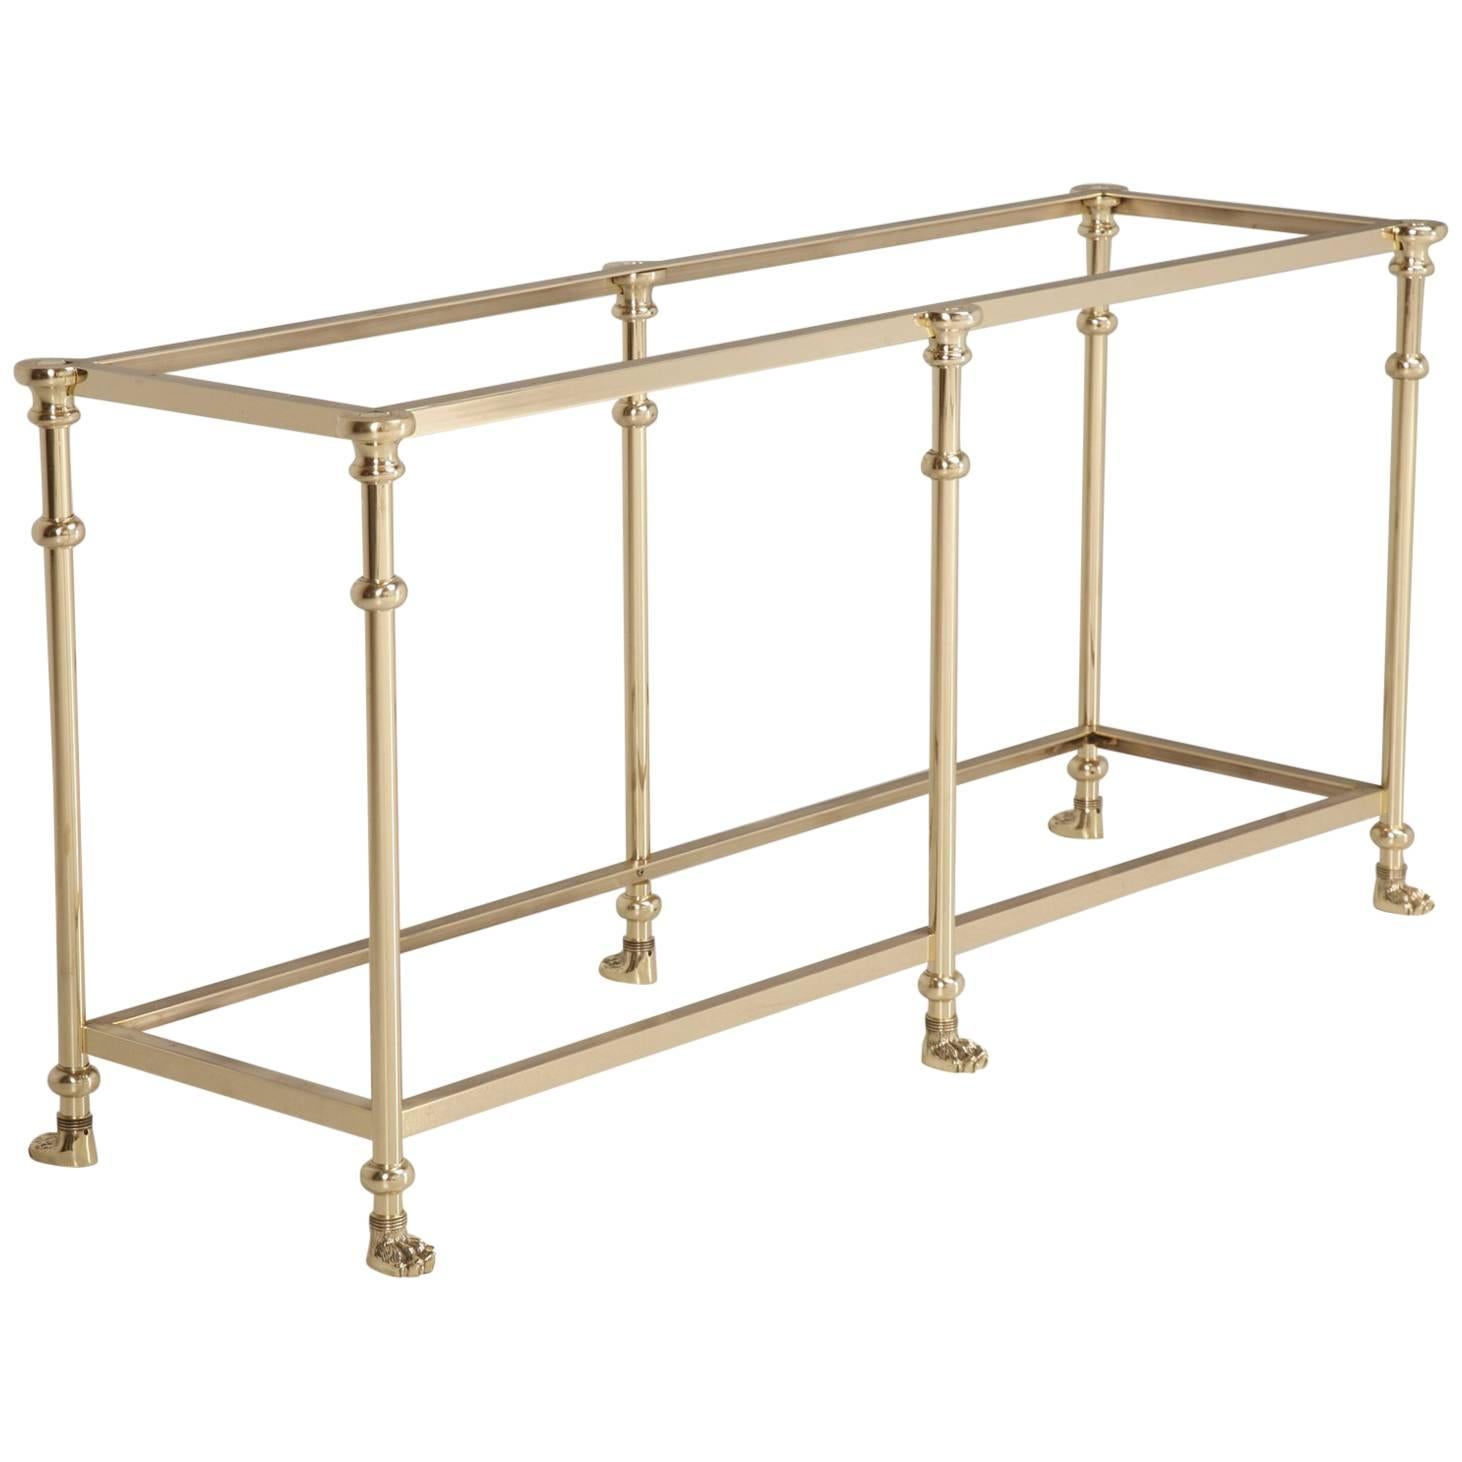 Solid Brass Console Table, or Kitchen Island Paw Feet Per Your Specifications For Sale